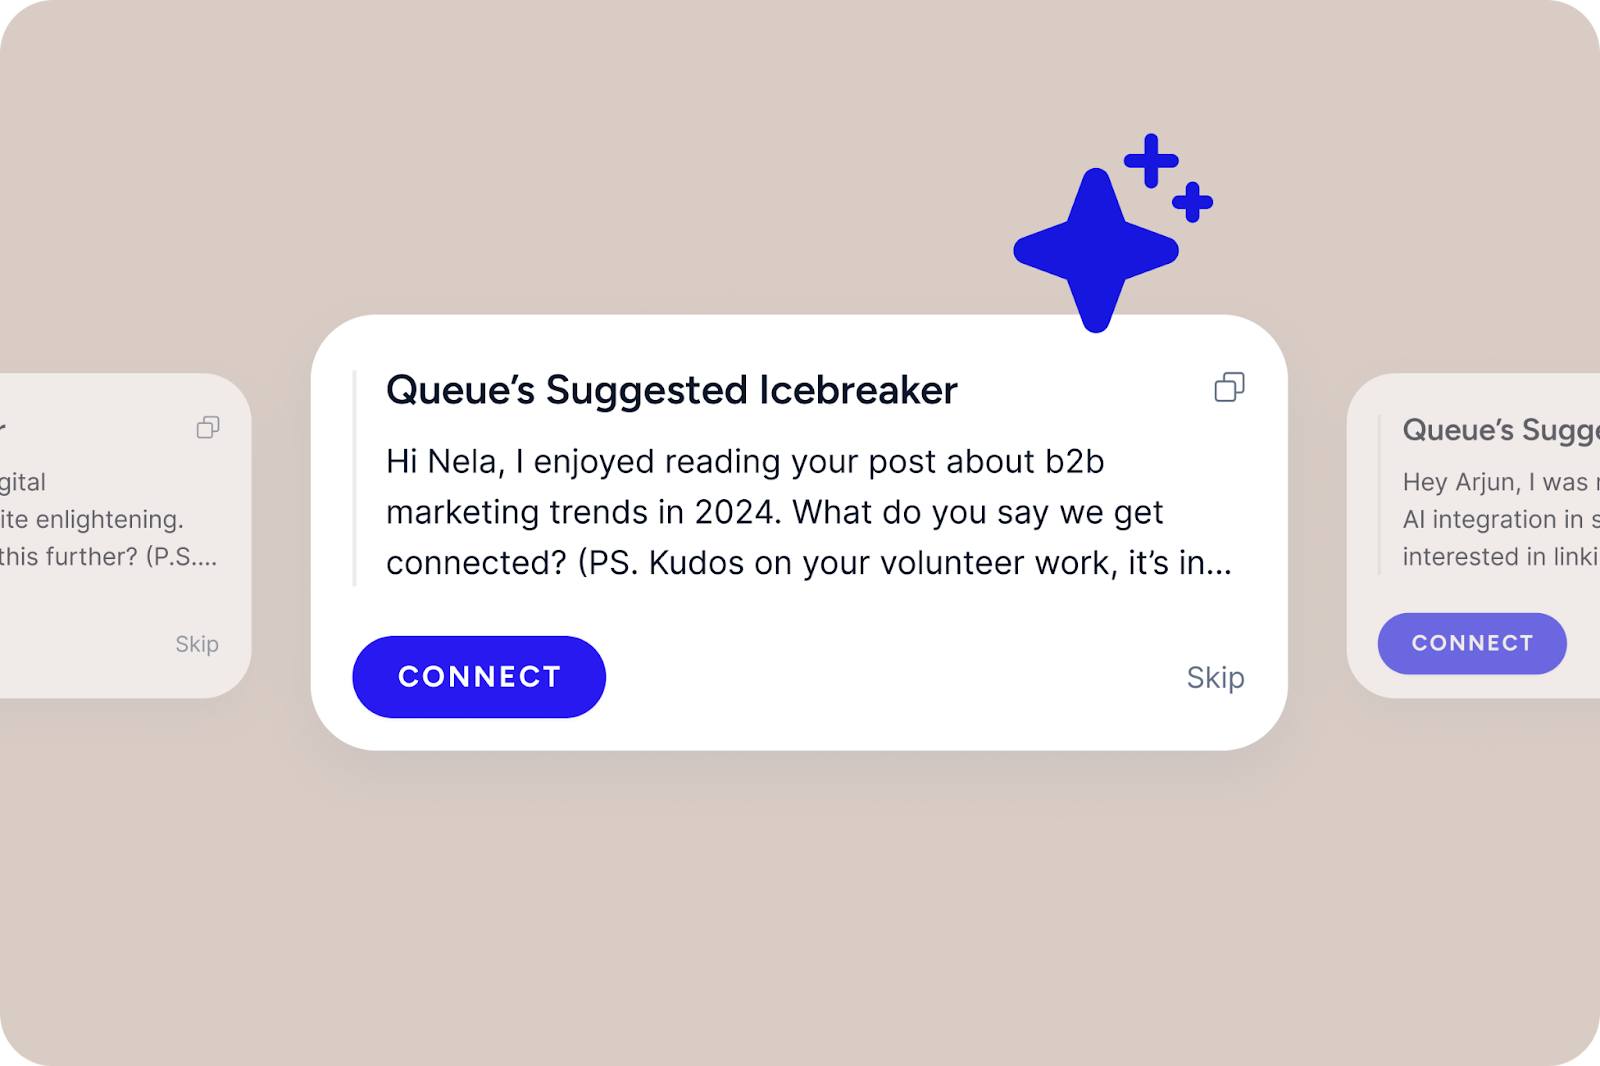 Pop-up window from Queue's platform showing a suggested icebreaker message for connecting with Nela, complimenting her post on B2B marketing trends and her volunteer work, with a 'CONNECT' button ready for action.